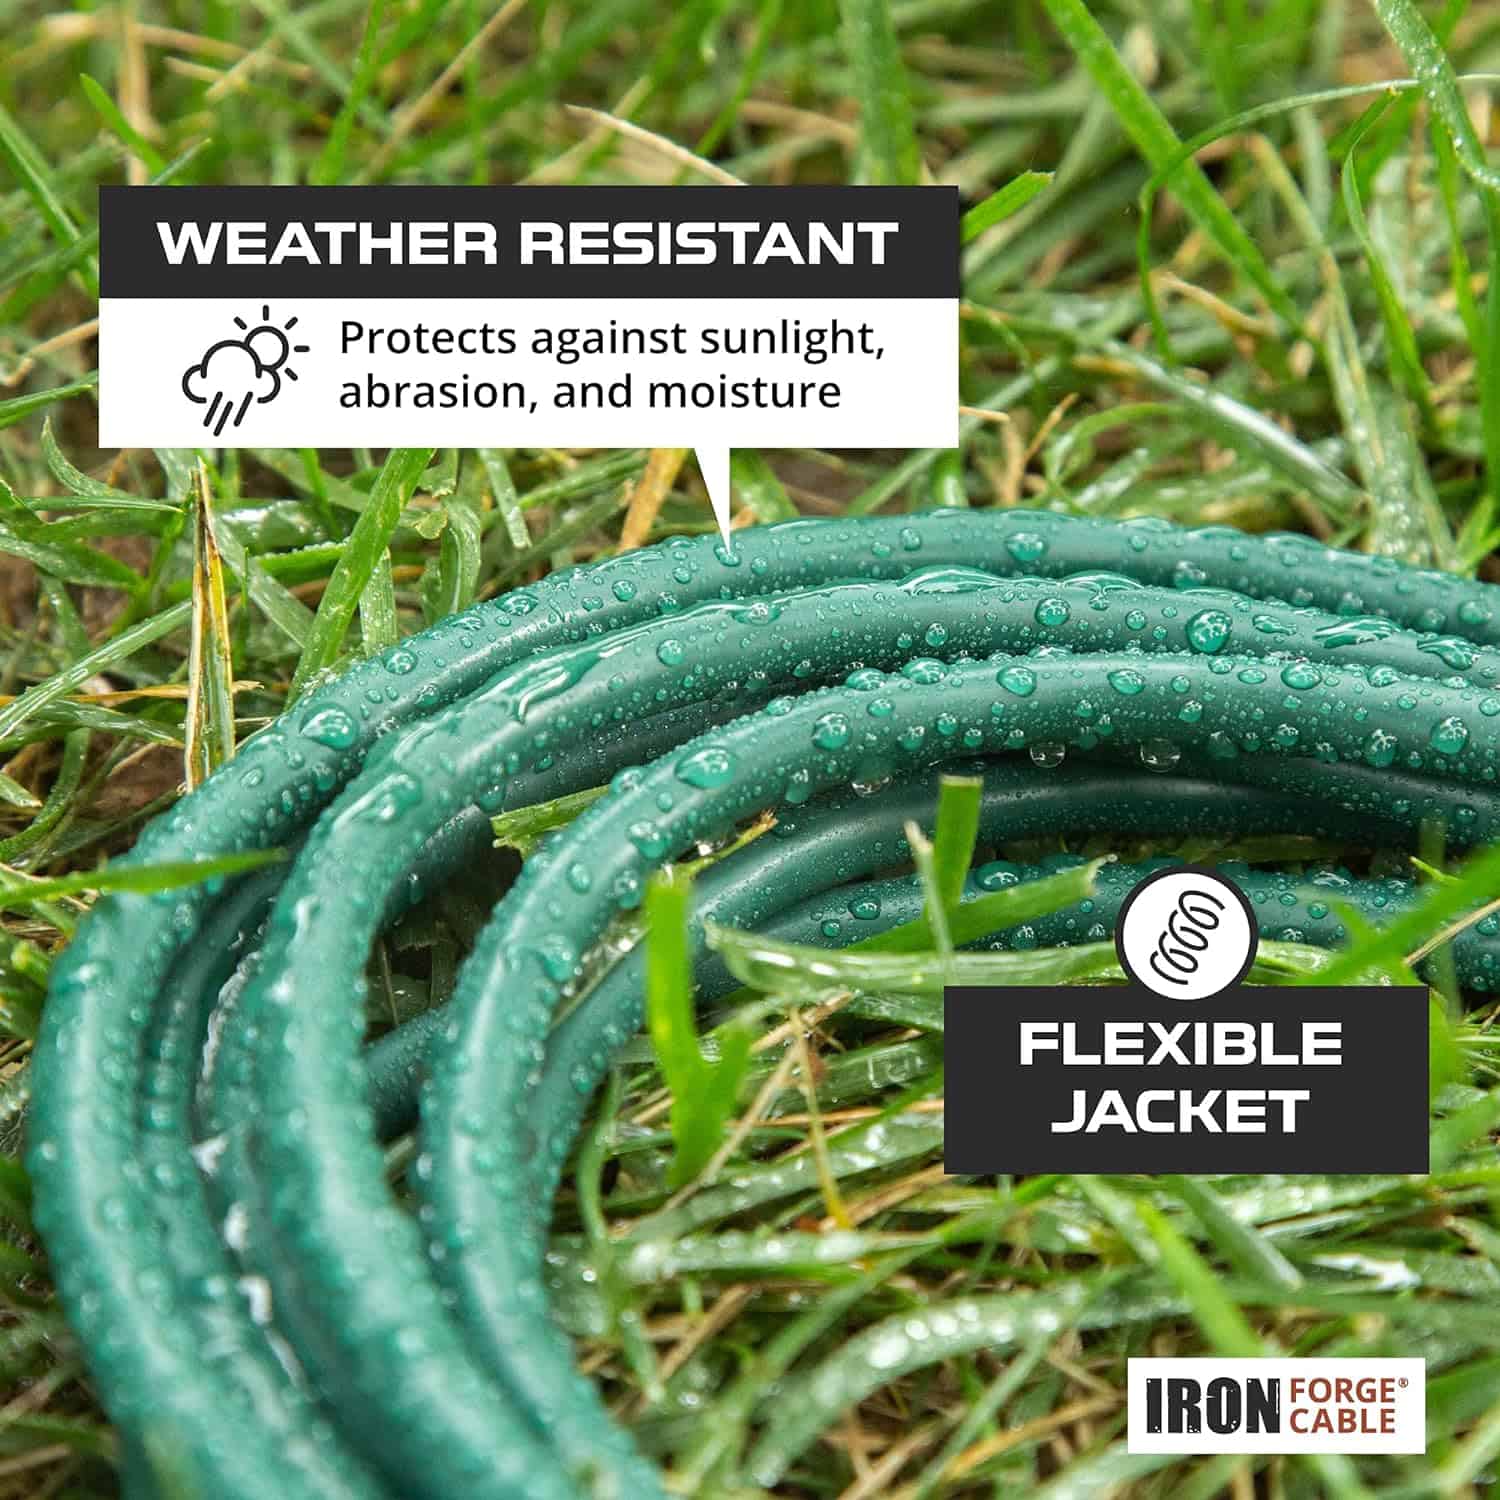 Irong Forge Cable 8 Foot Green Outdoor Extension Cord 2 Pack, 16 3, Indoor Outdoor Use, 3 Prong, Weatherproof Exterior, Great for Garden, Landscaping, 4